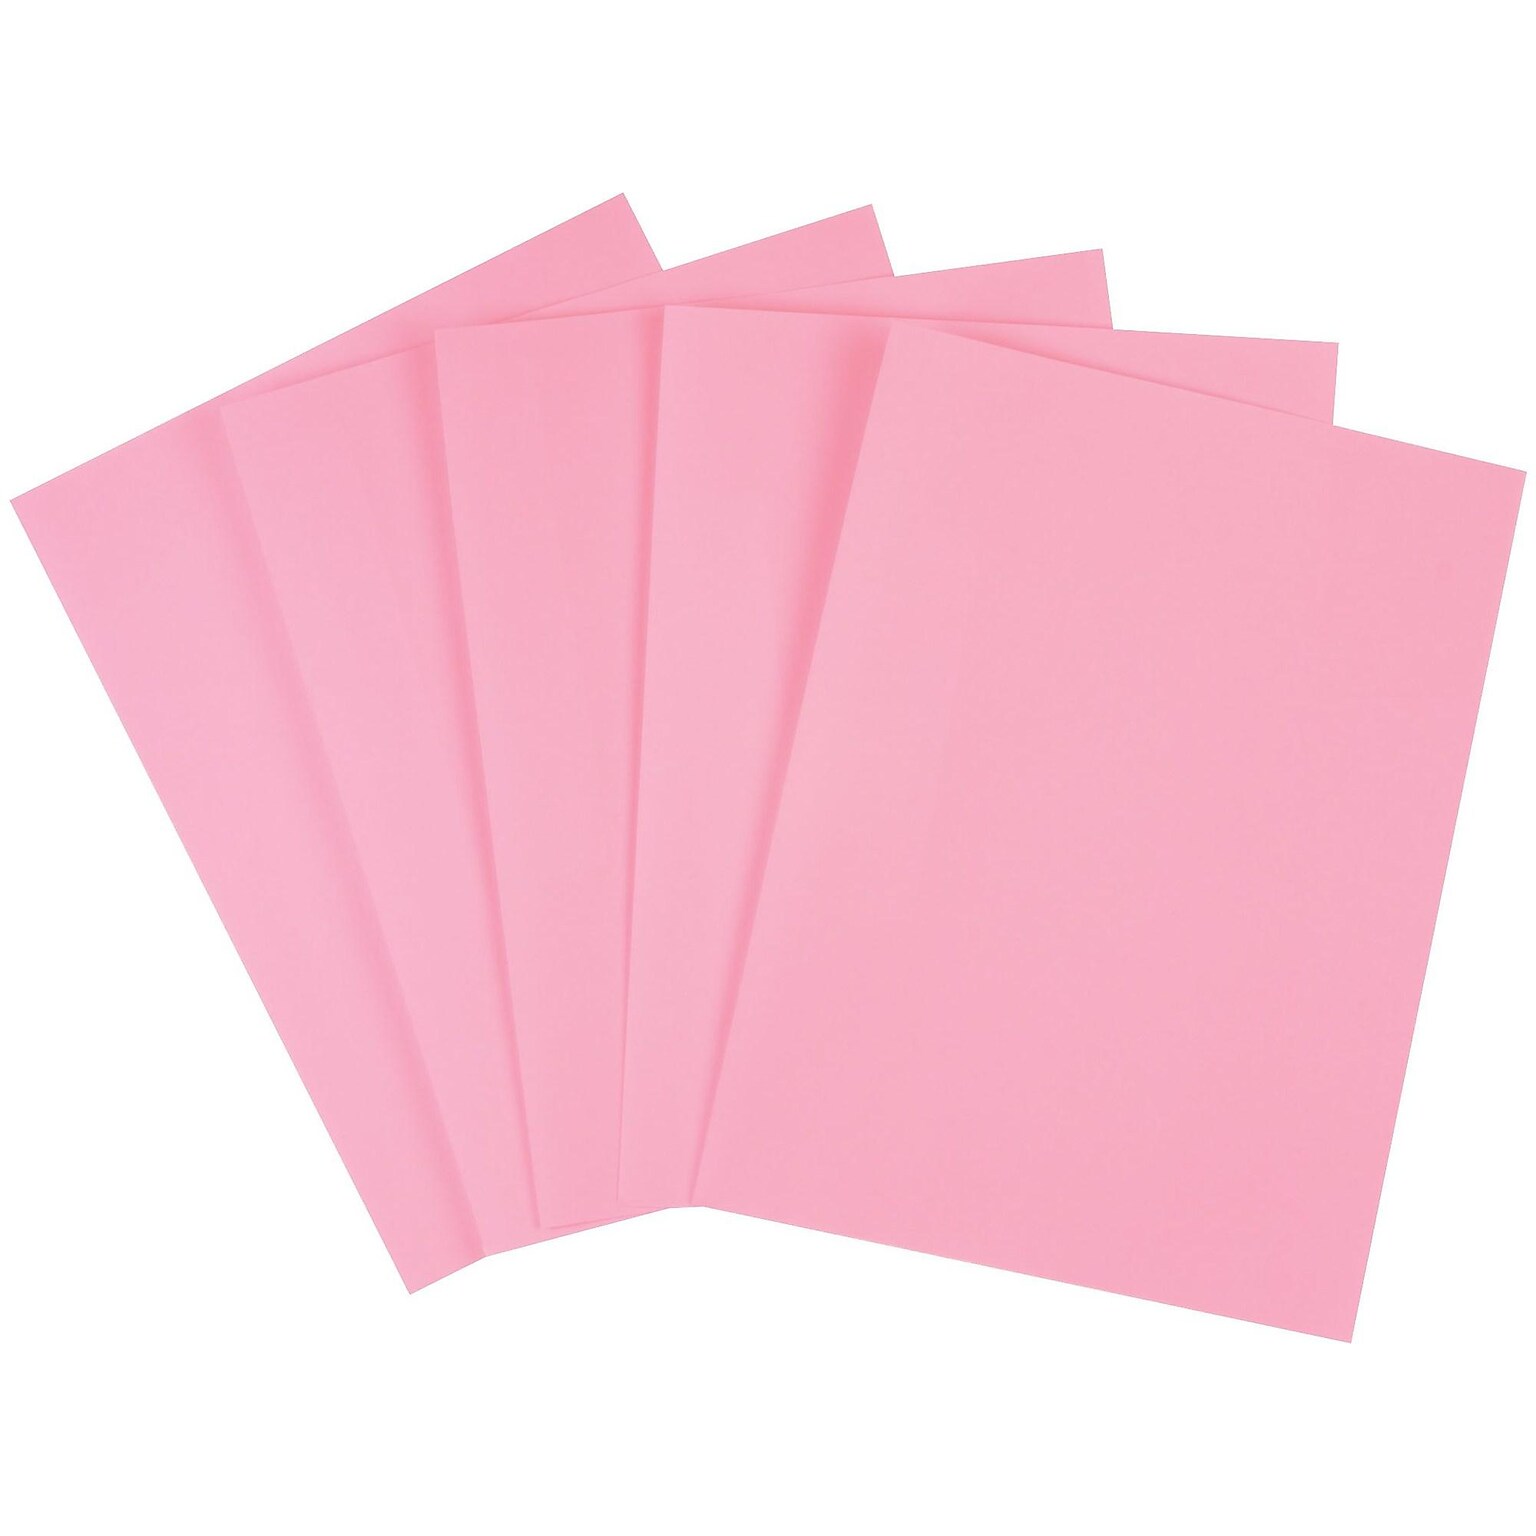 Staples Brights Multipurpose Colored Paper, 20 lb, 8.5 x 11, Pink, 500/Ream, 5 Reams/Carton (25207A)